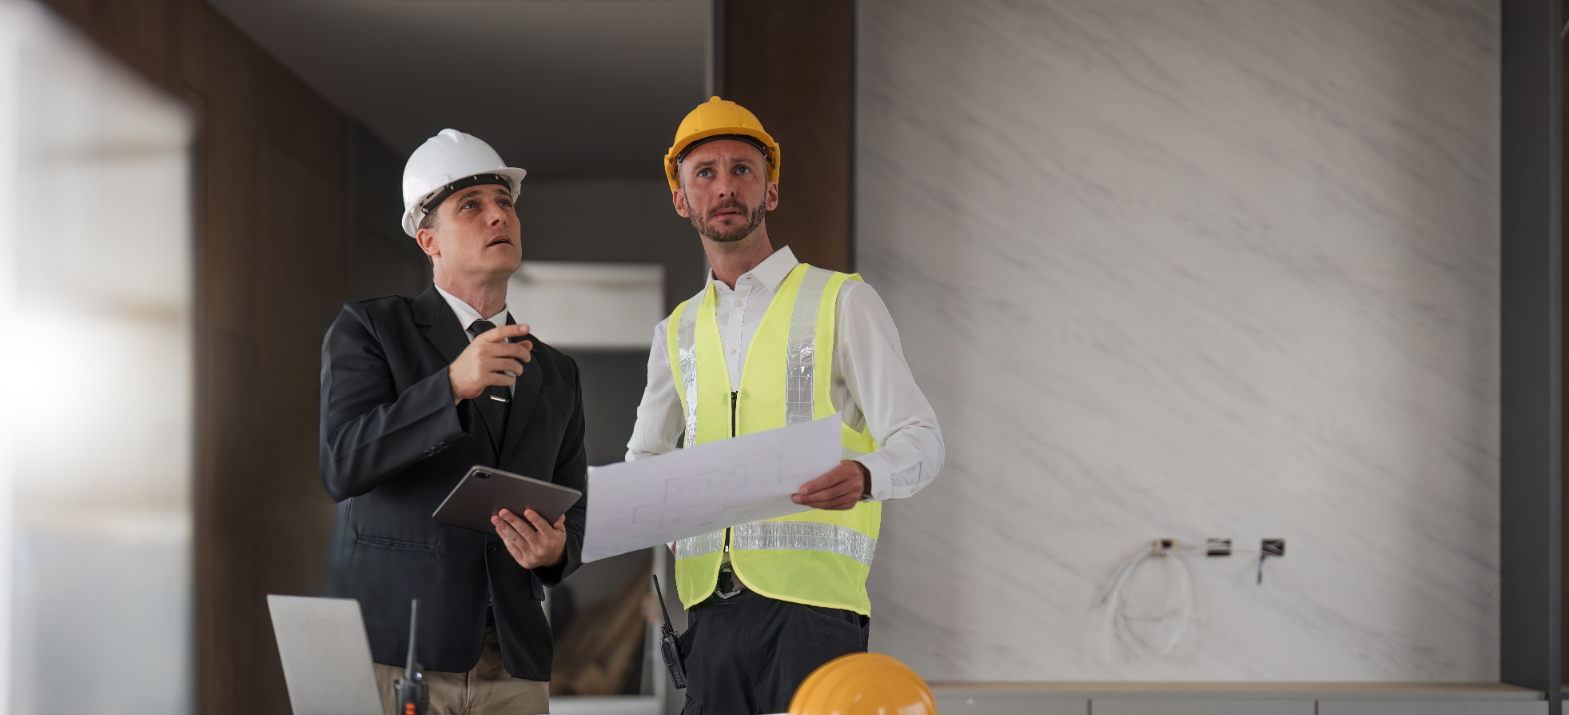 Two men wearing hard hats compare documents in a commercial building during construction